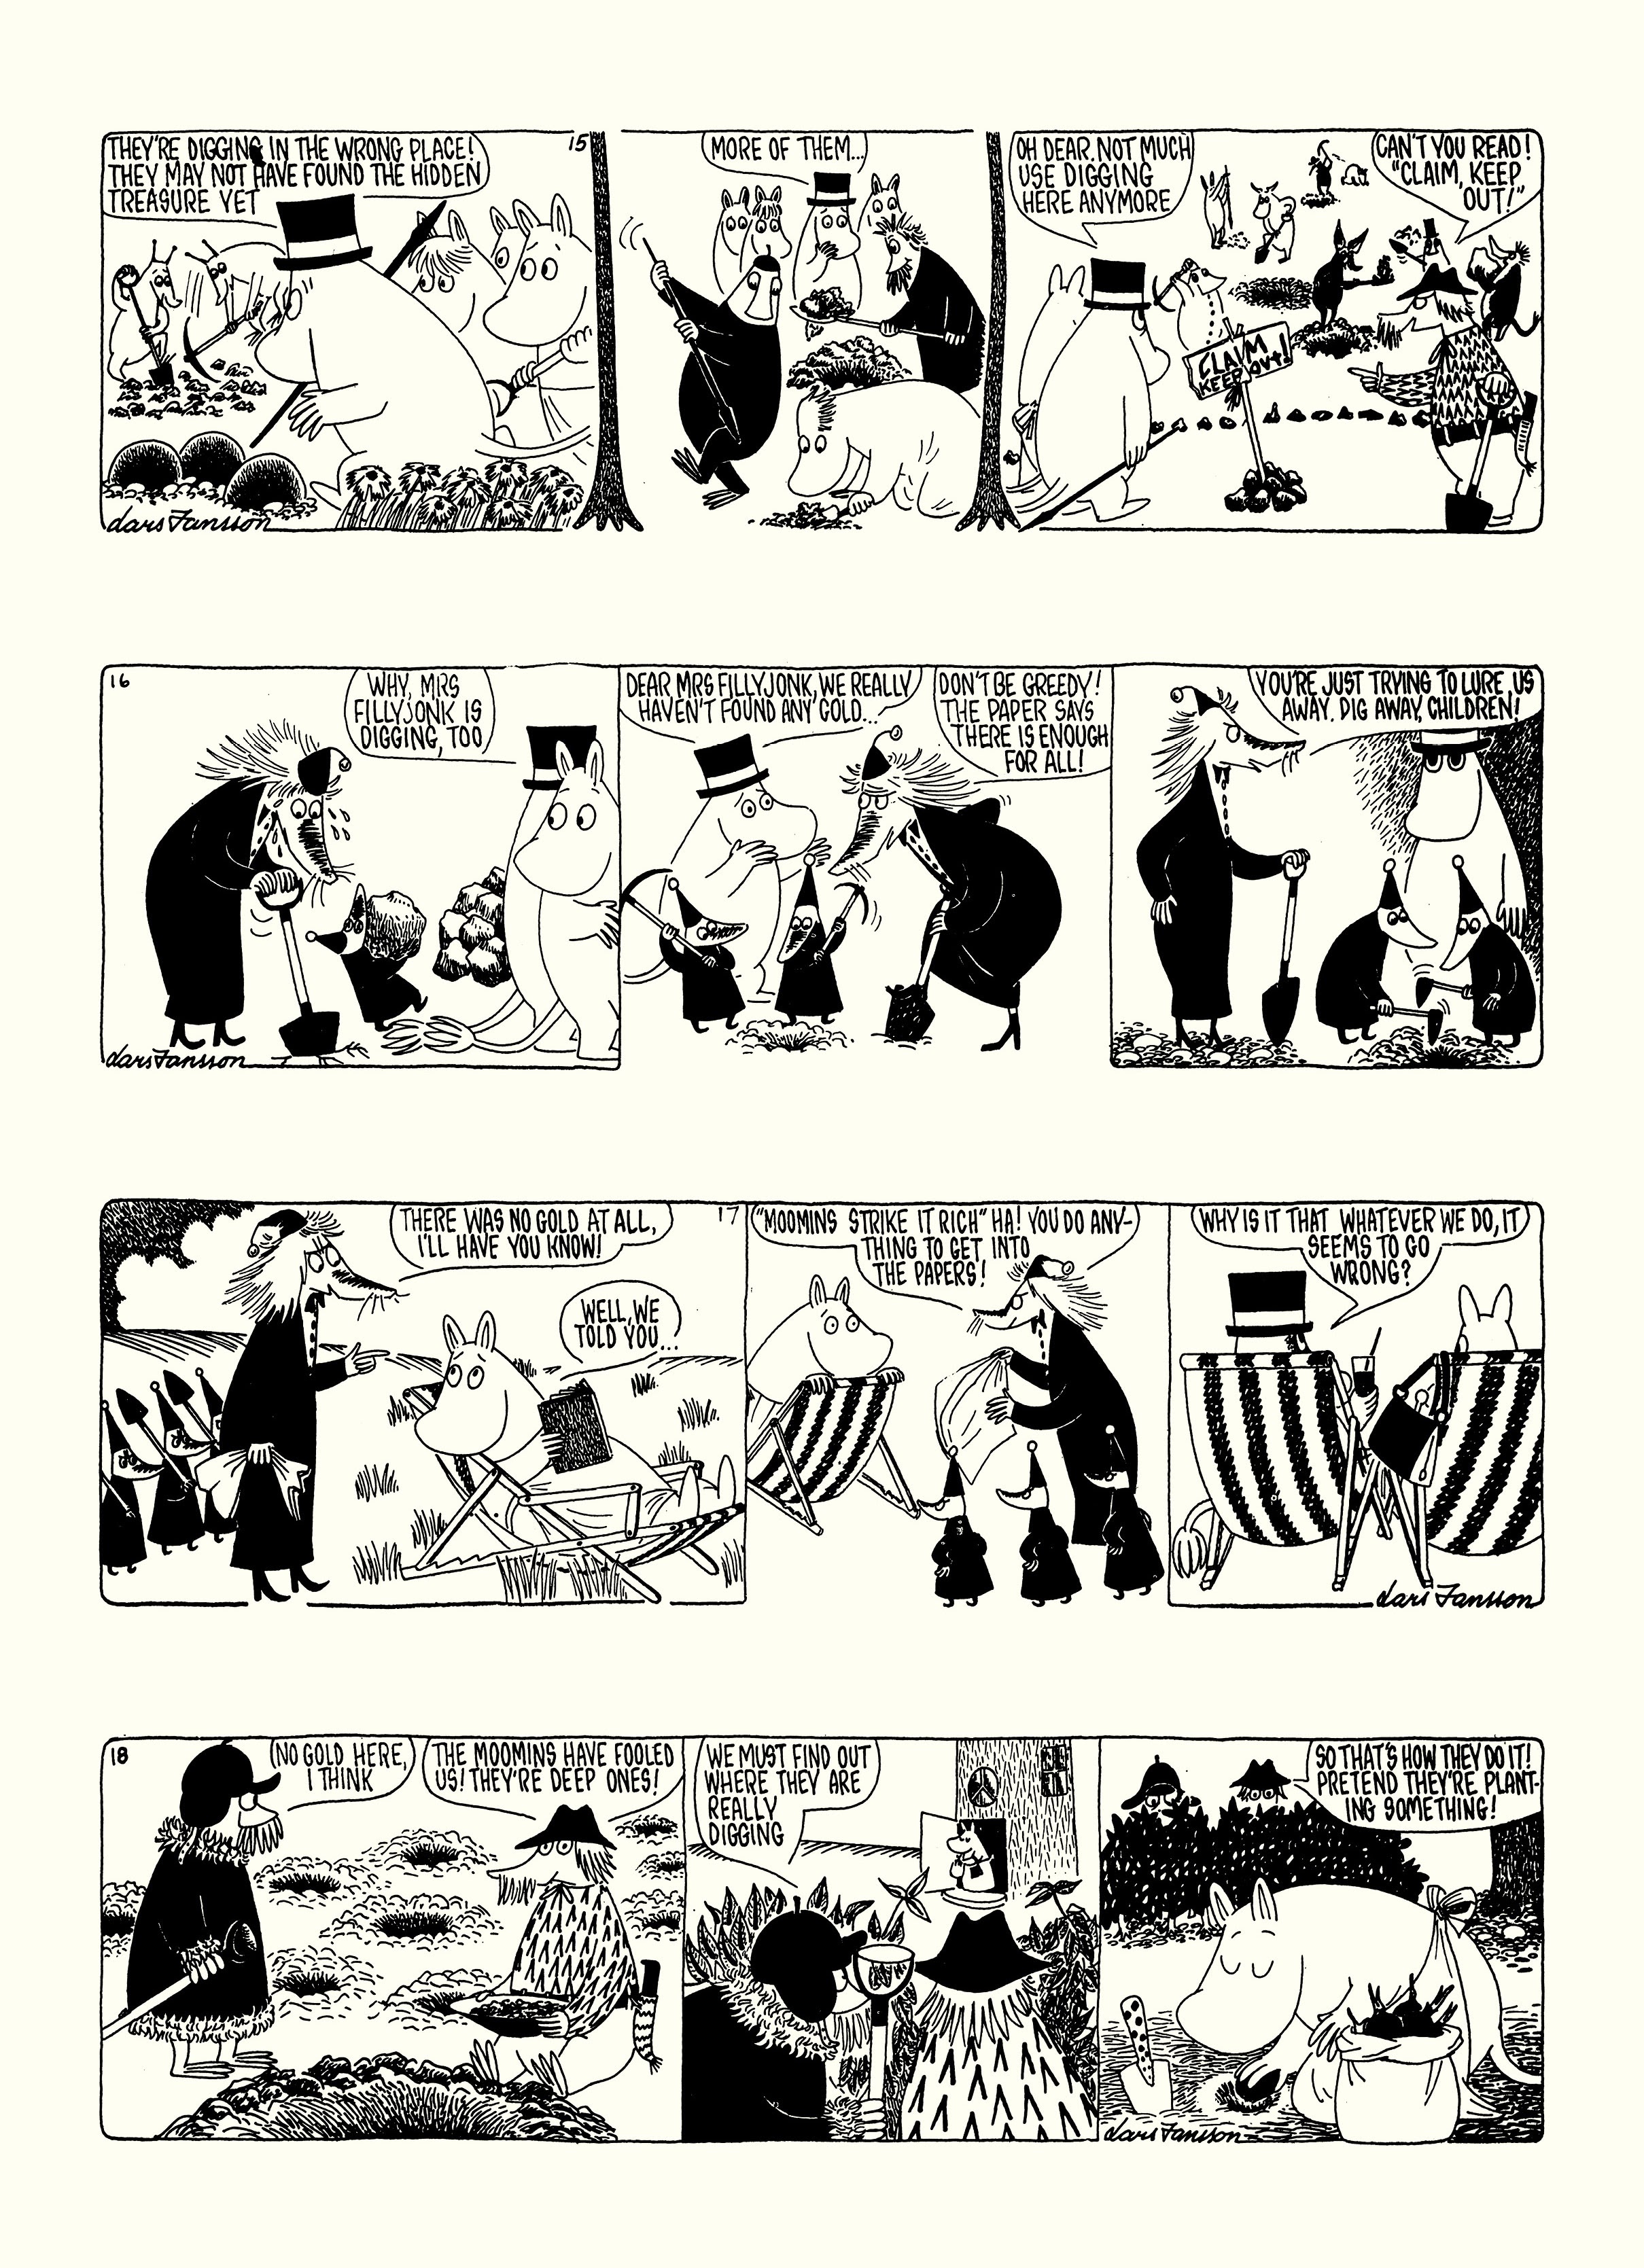 Read online Moomin: The Complete Lars Jansson Comic Strip comic -  Issue # TPB 7 - 73